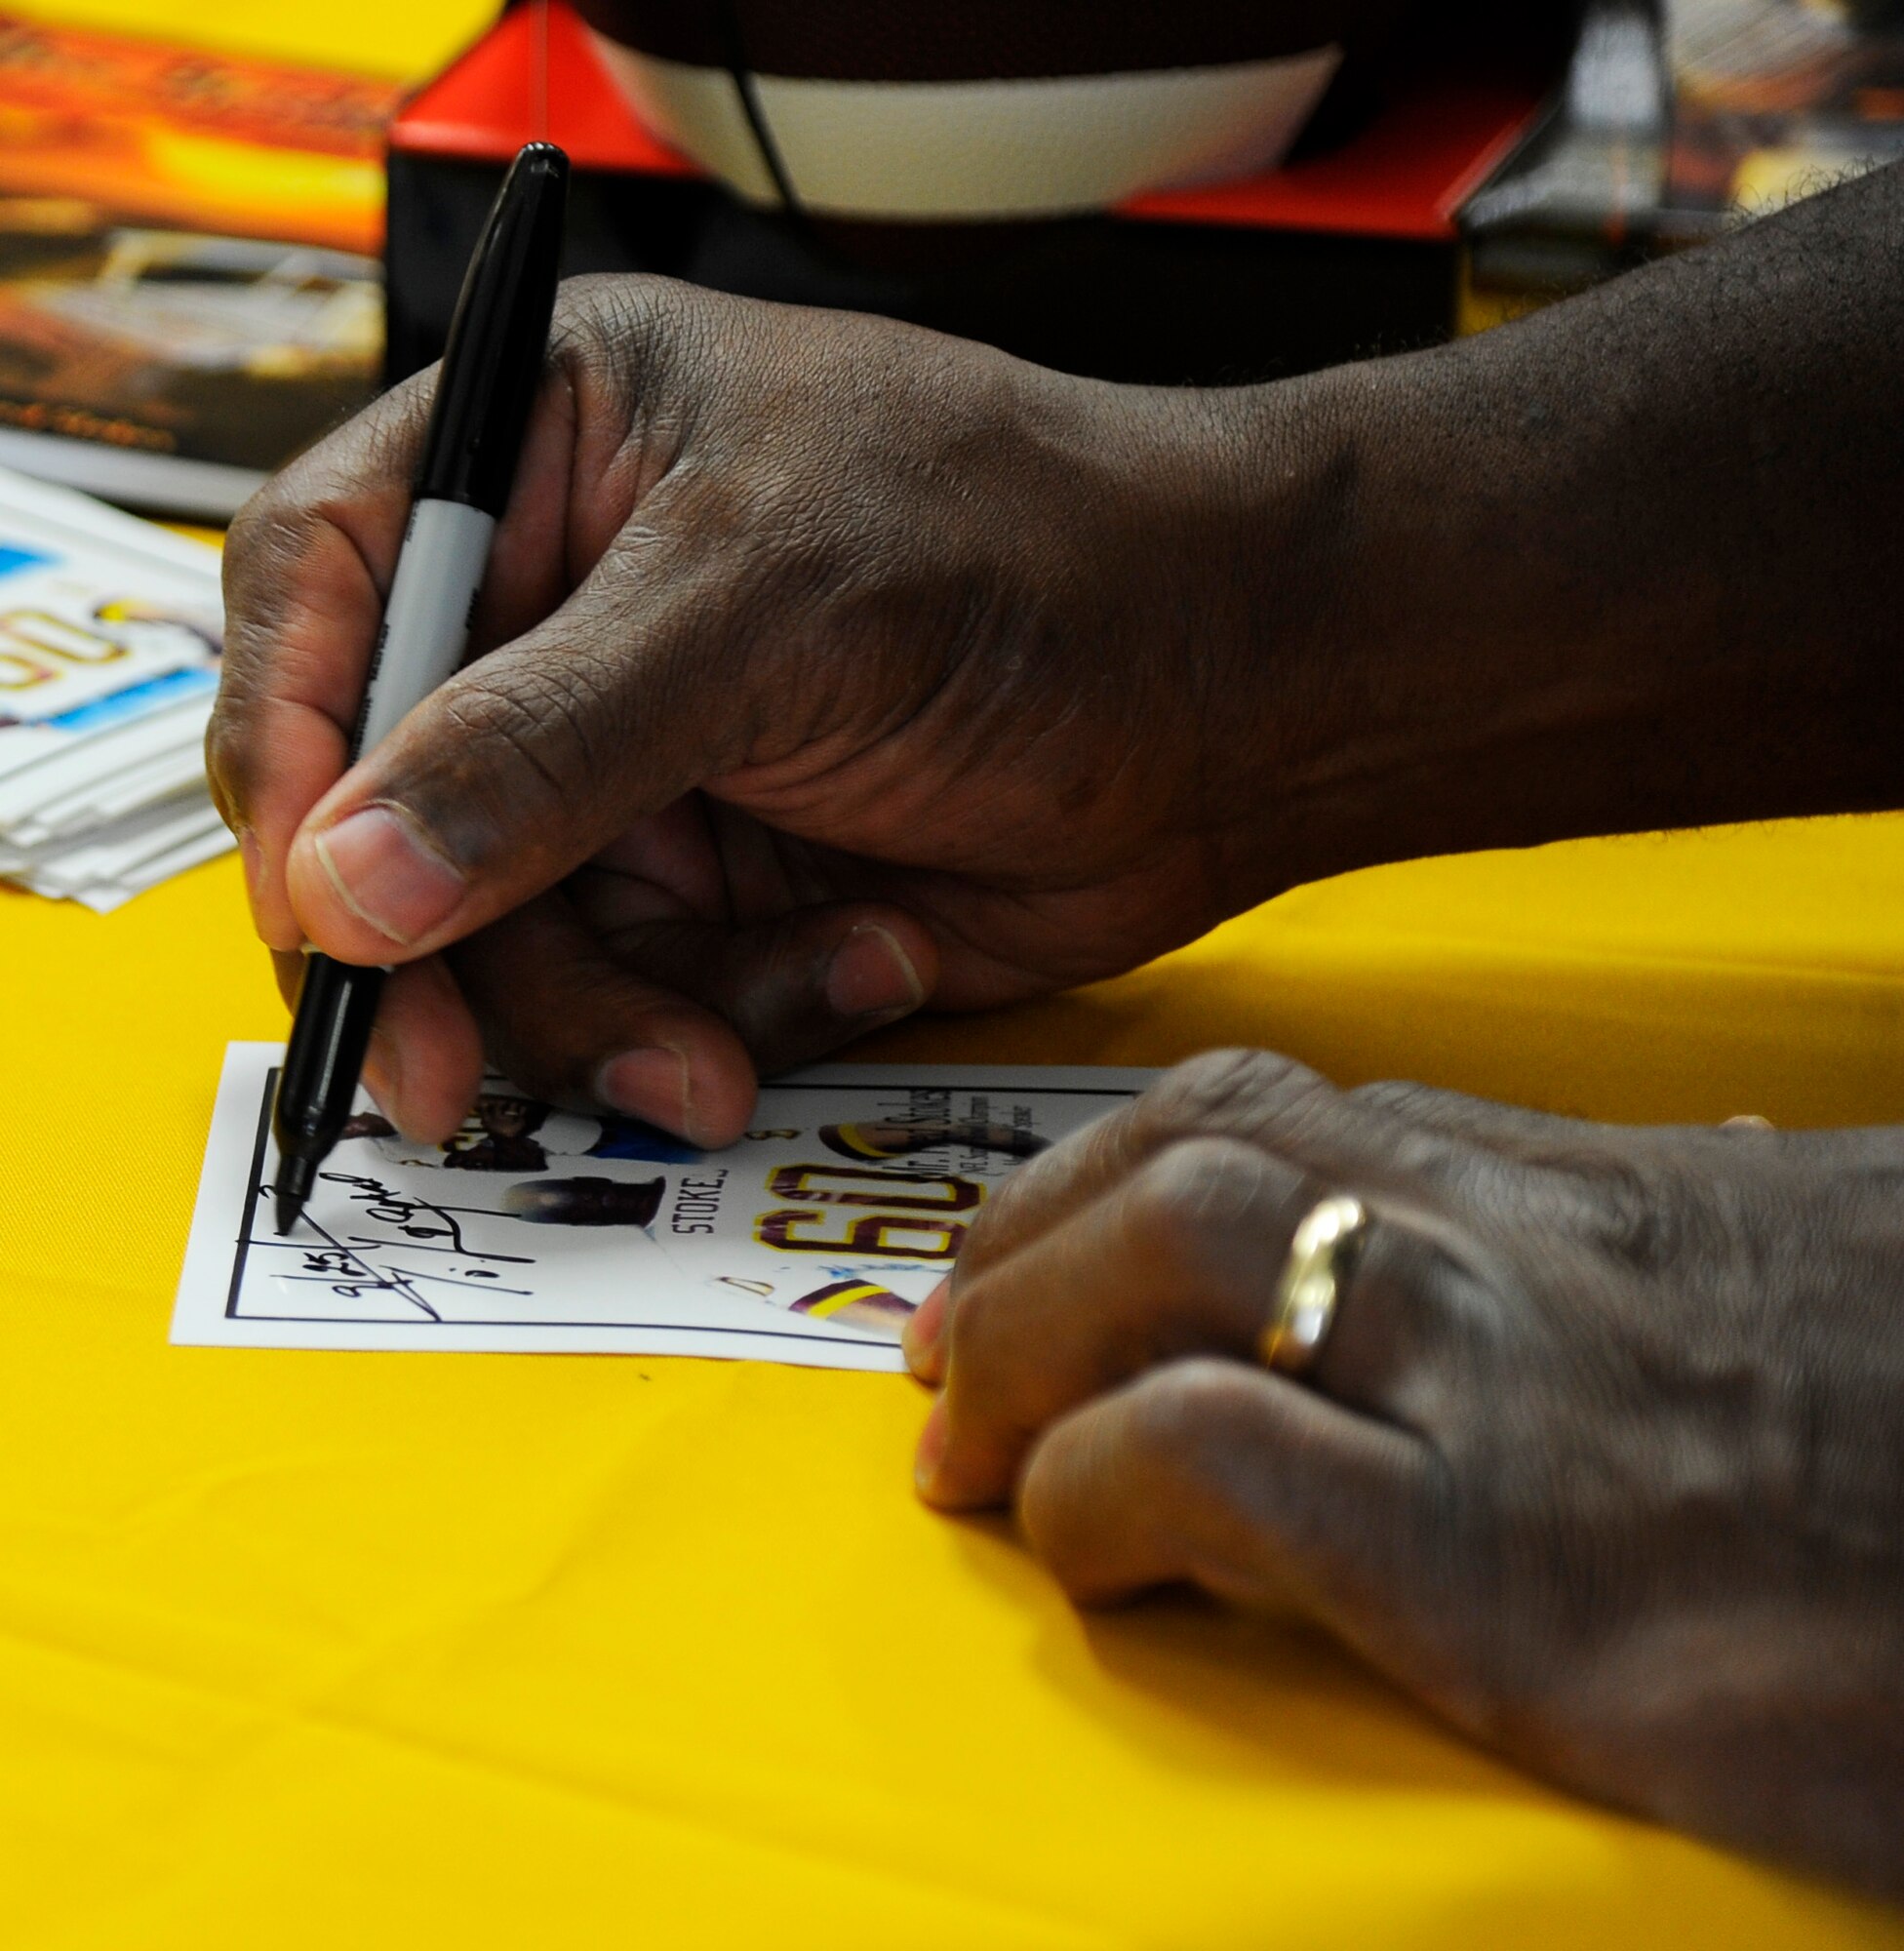 Fred Stokes, former NFL Washington Redskins player, signs his autograph for a fan during Retiree Appreciation Day at the Base Exchange on Hurlburt Field, Fla., Sept. 25, 2014. The event included various activities, such as free blood pressure checks and sidewalk sales to show retirees in the local community appreciation for their service to our country. (U.S. Air Force photo/Staff Sgt. Sarah Hanson)